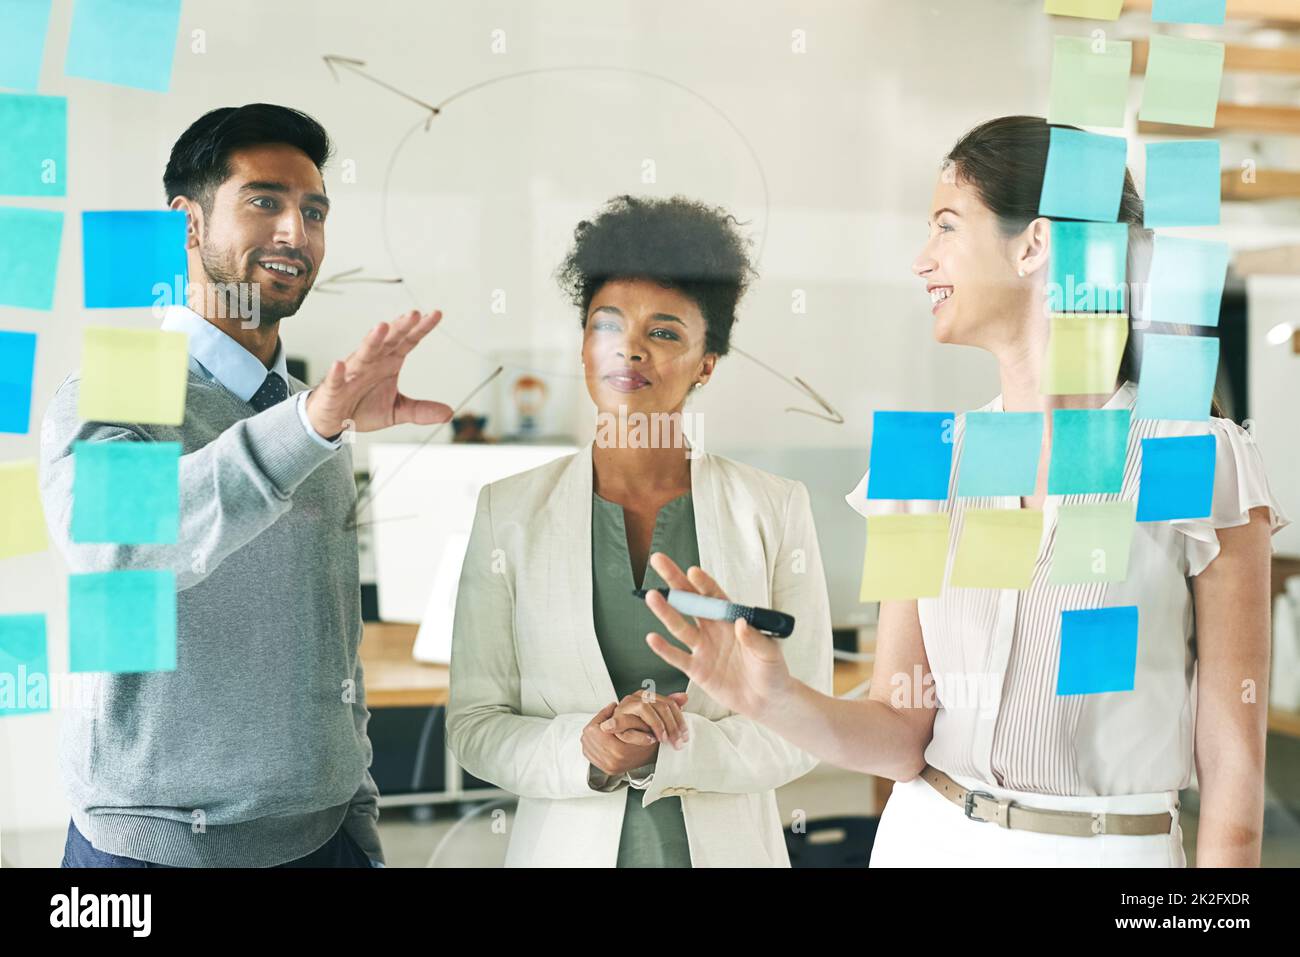 Brainstorming brilliant ideas. Shot of a group of young colleagues having a brainstorming session at work. Stock Photo